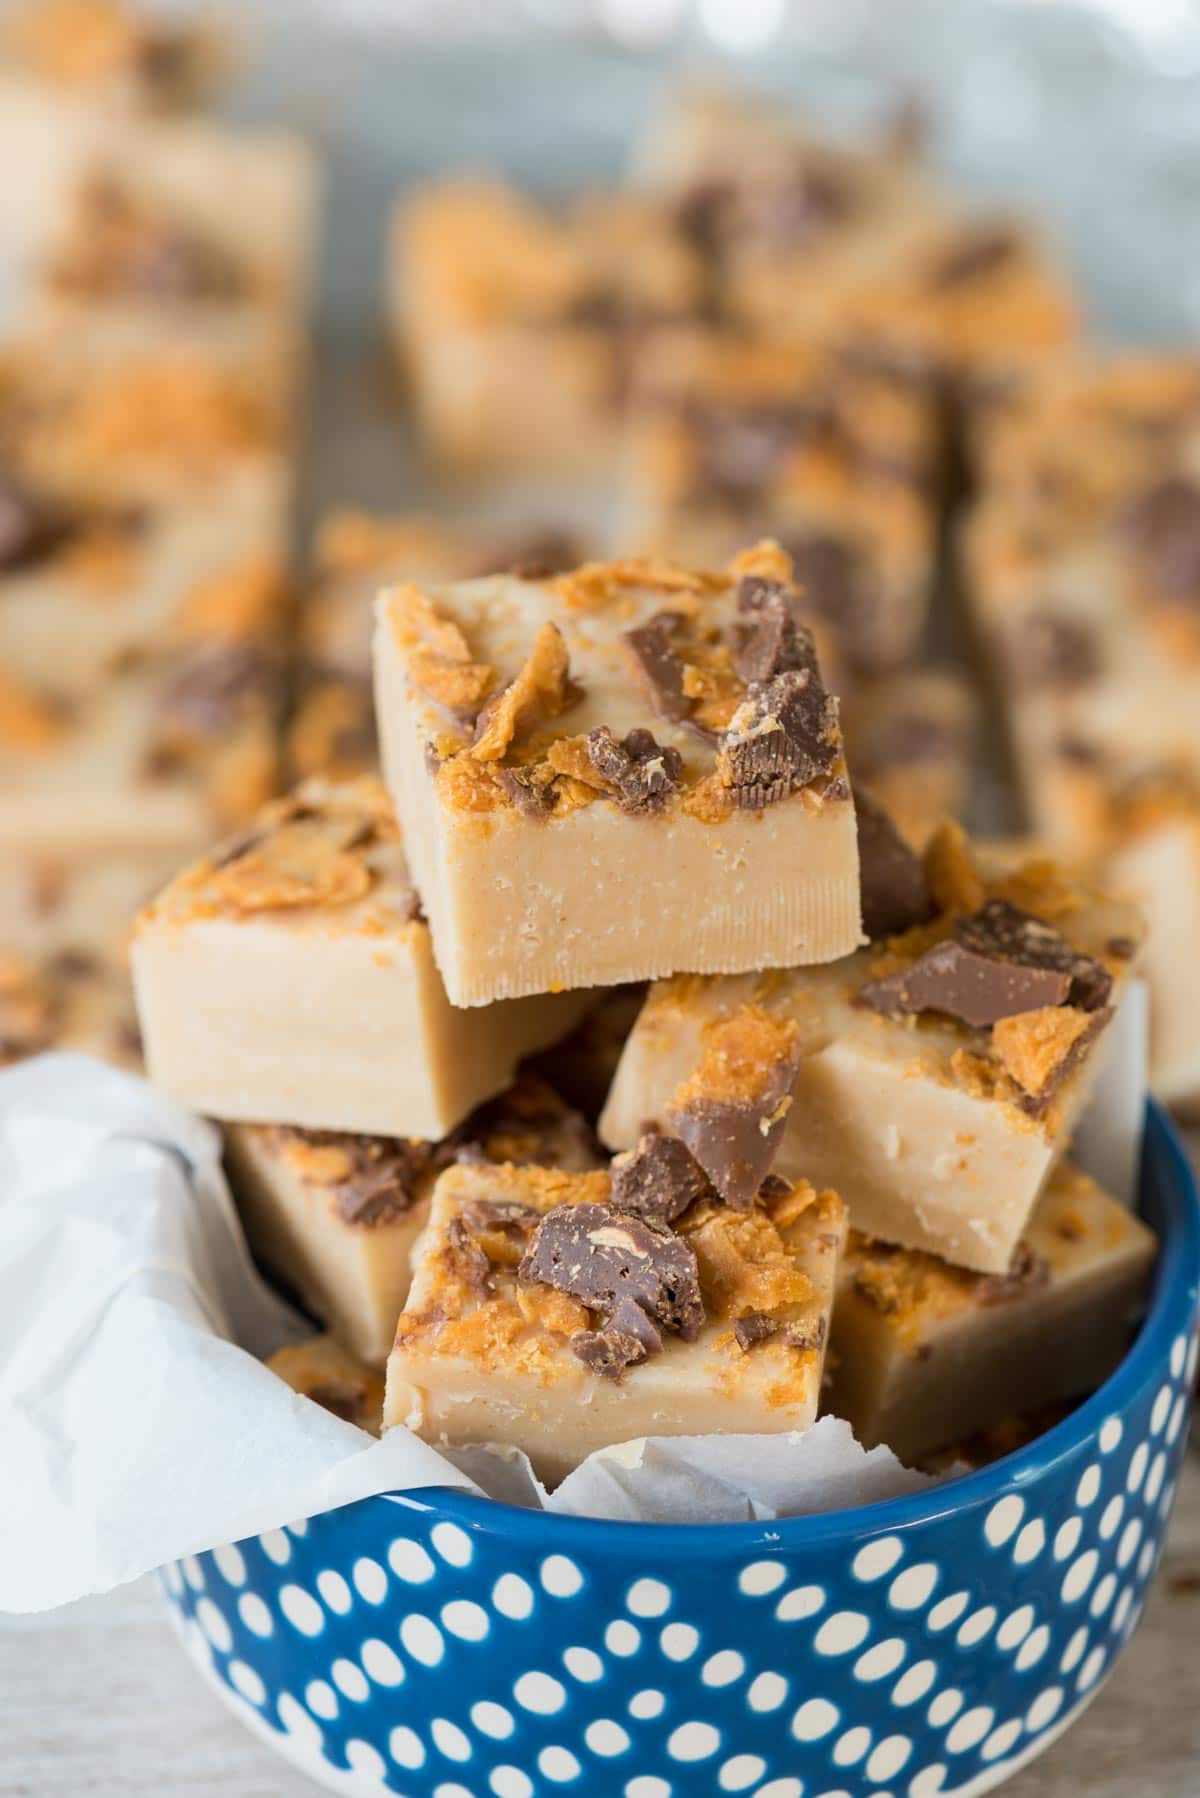 5 Minute Peanut Butter Fudge - this recipe has only 5 ingredients! Add your favorite candy or leave it plain for an EASY peanut butter fudge recipe!